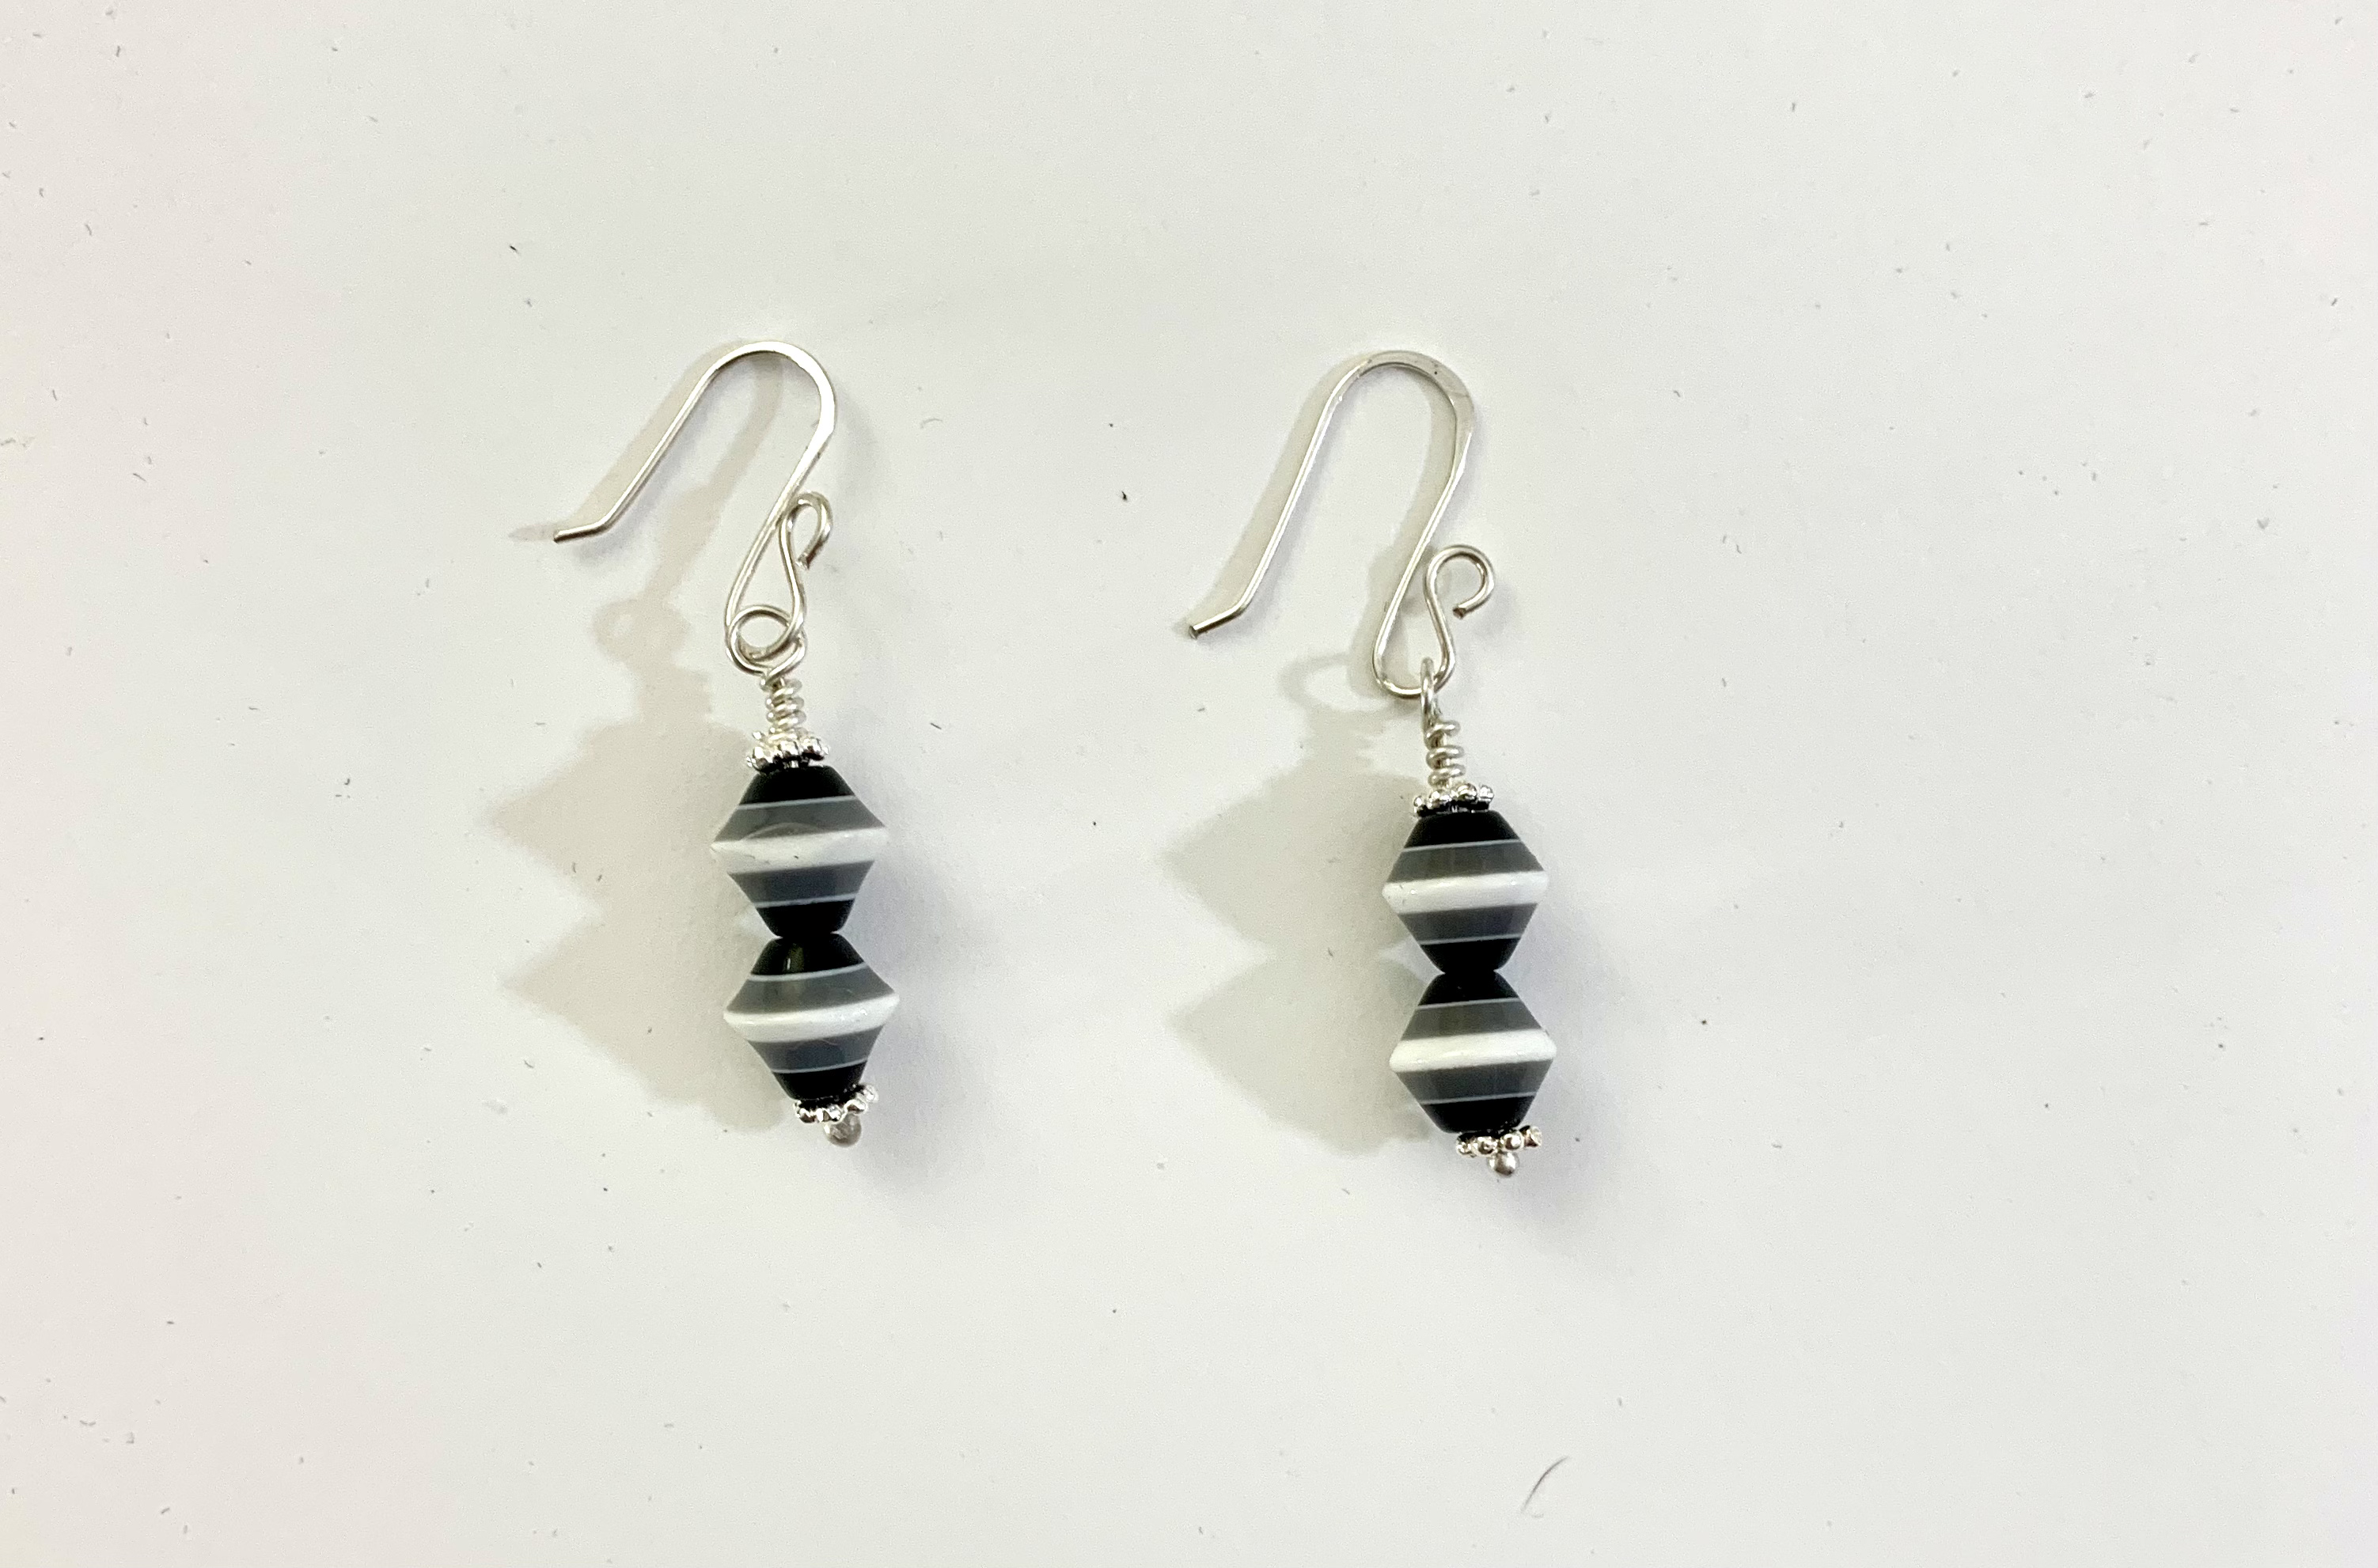 Black and White Striped Earrings